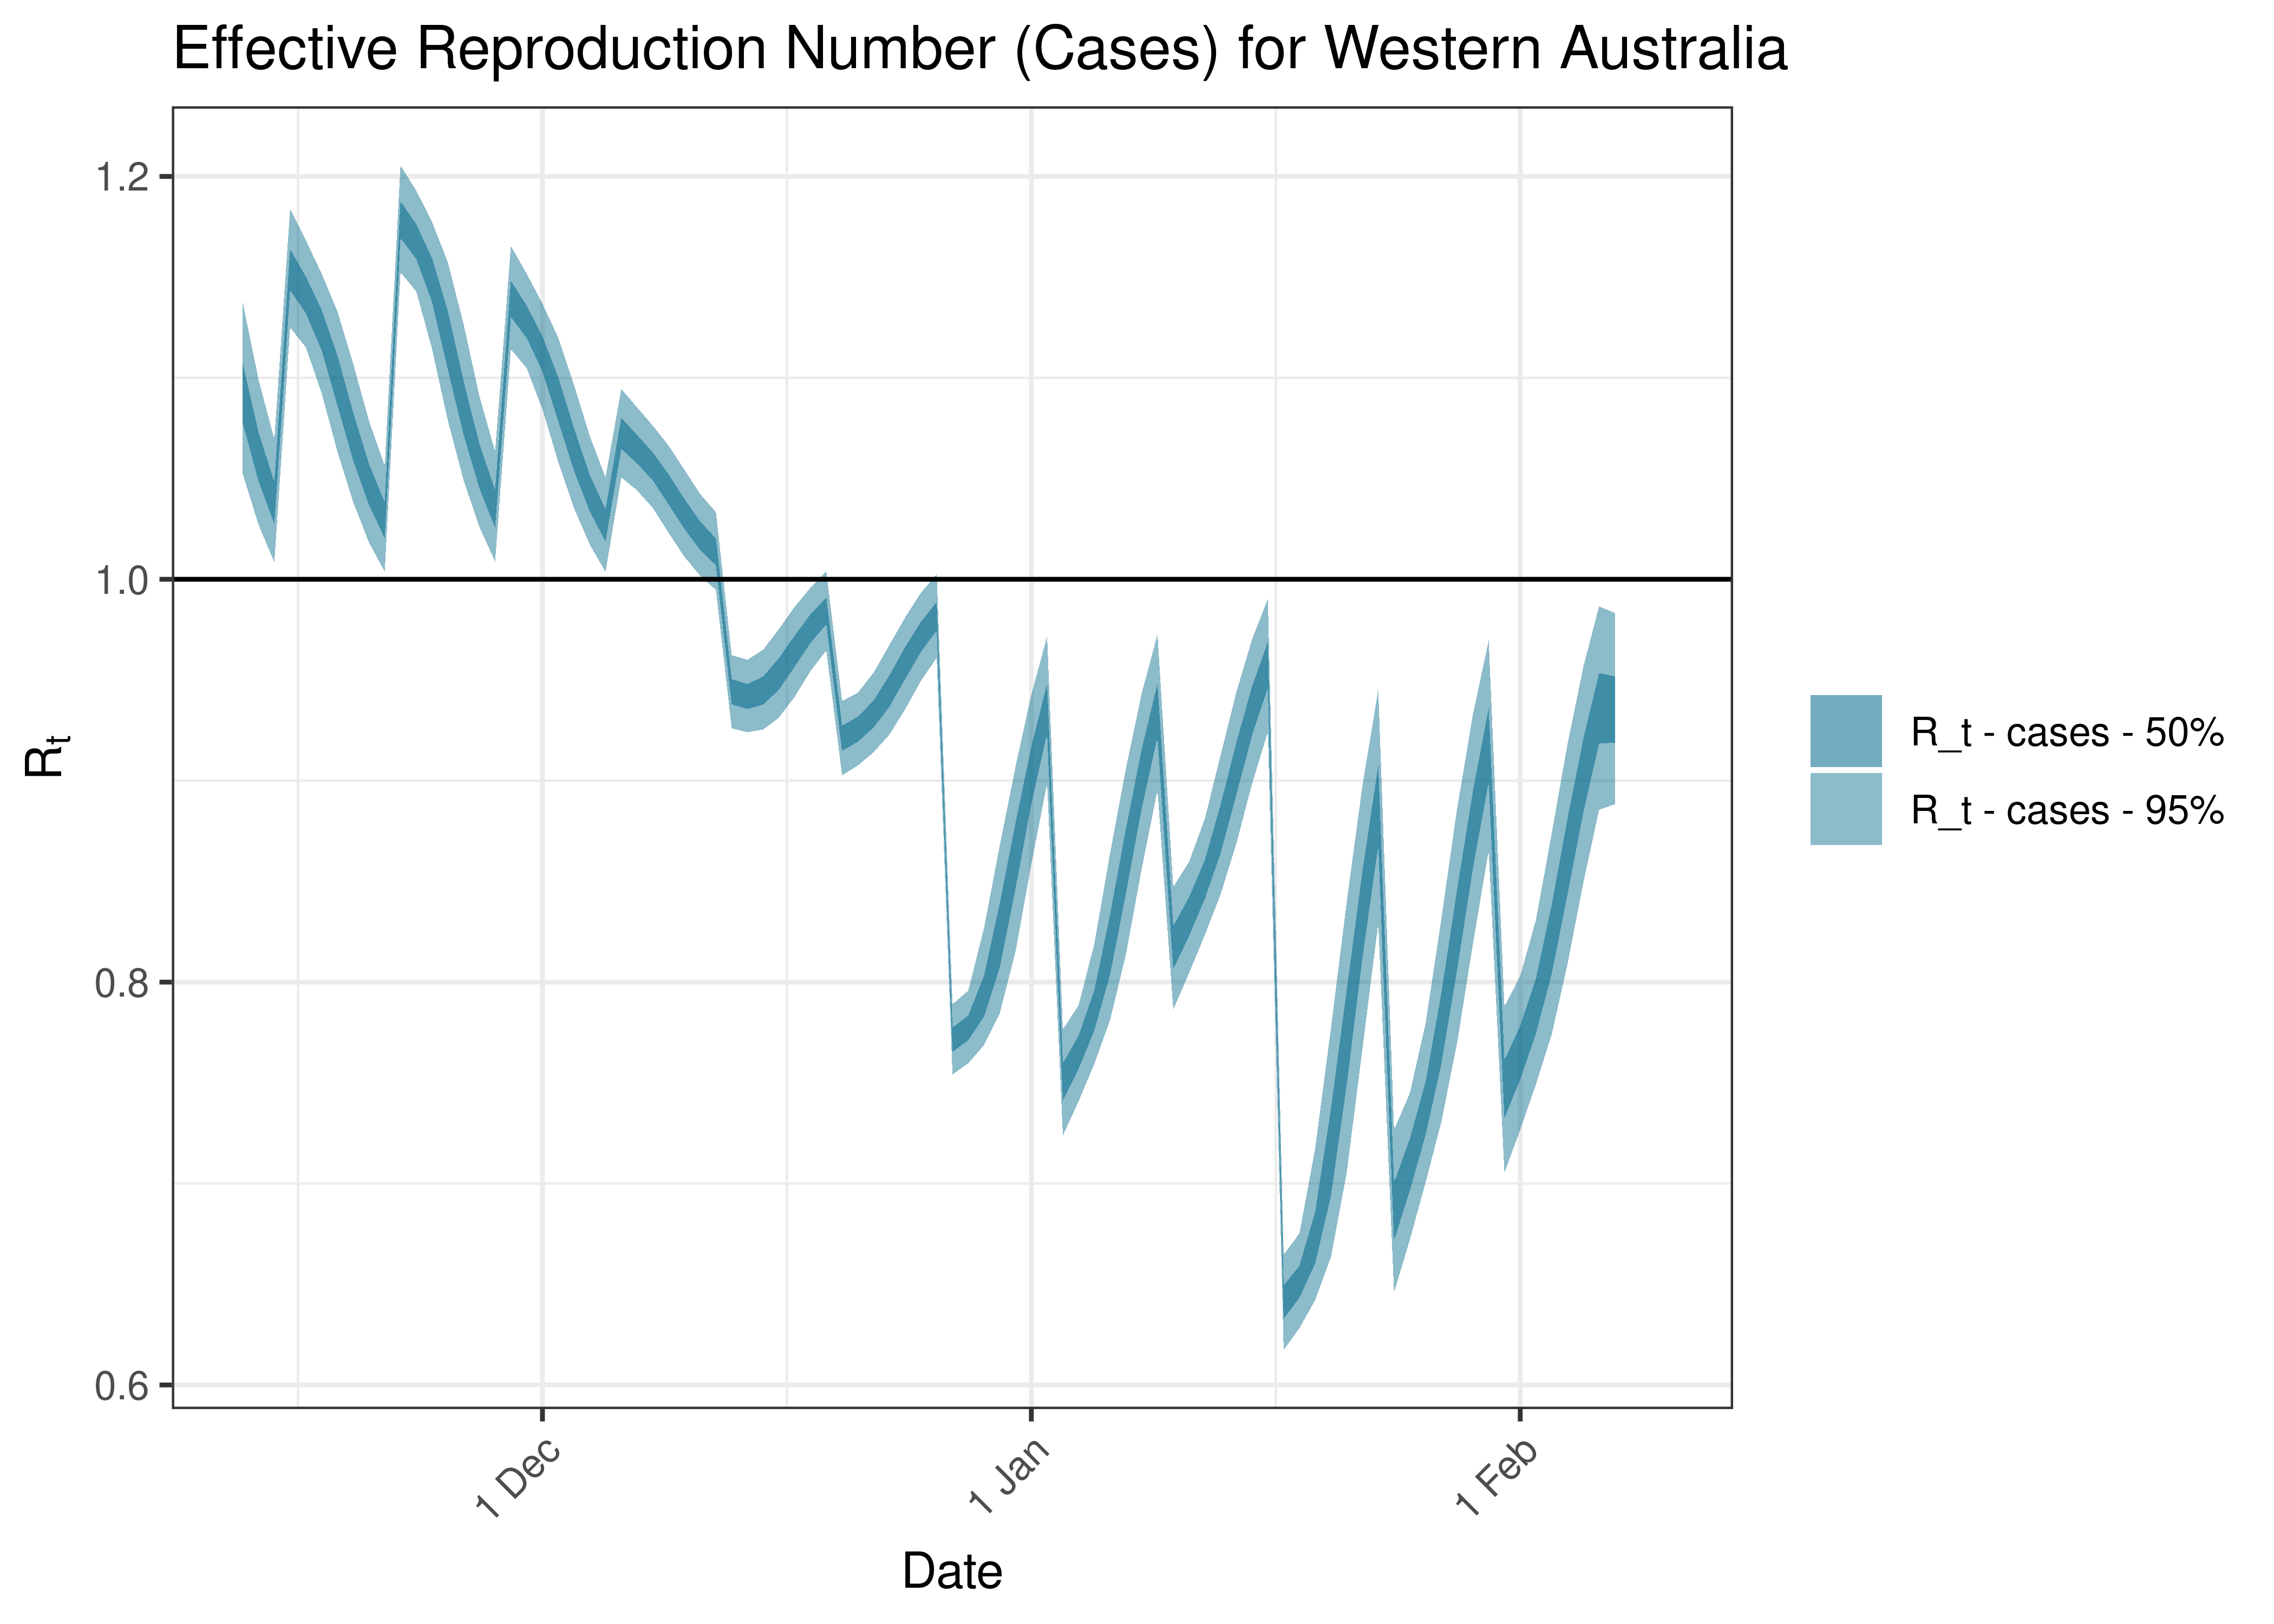 Estimated Effective Reproduction Number Based on Cases for Western Australia over last 90 days